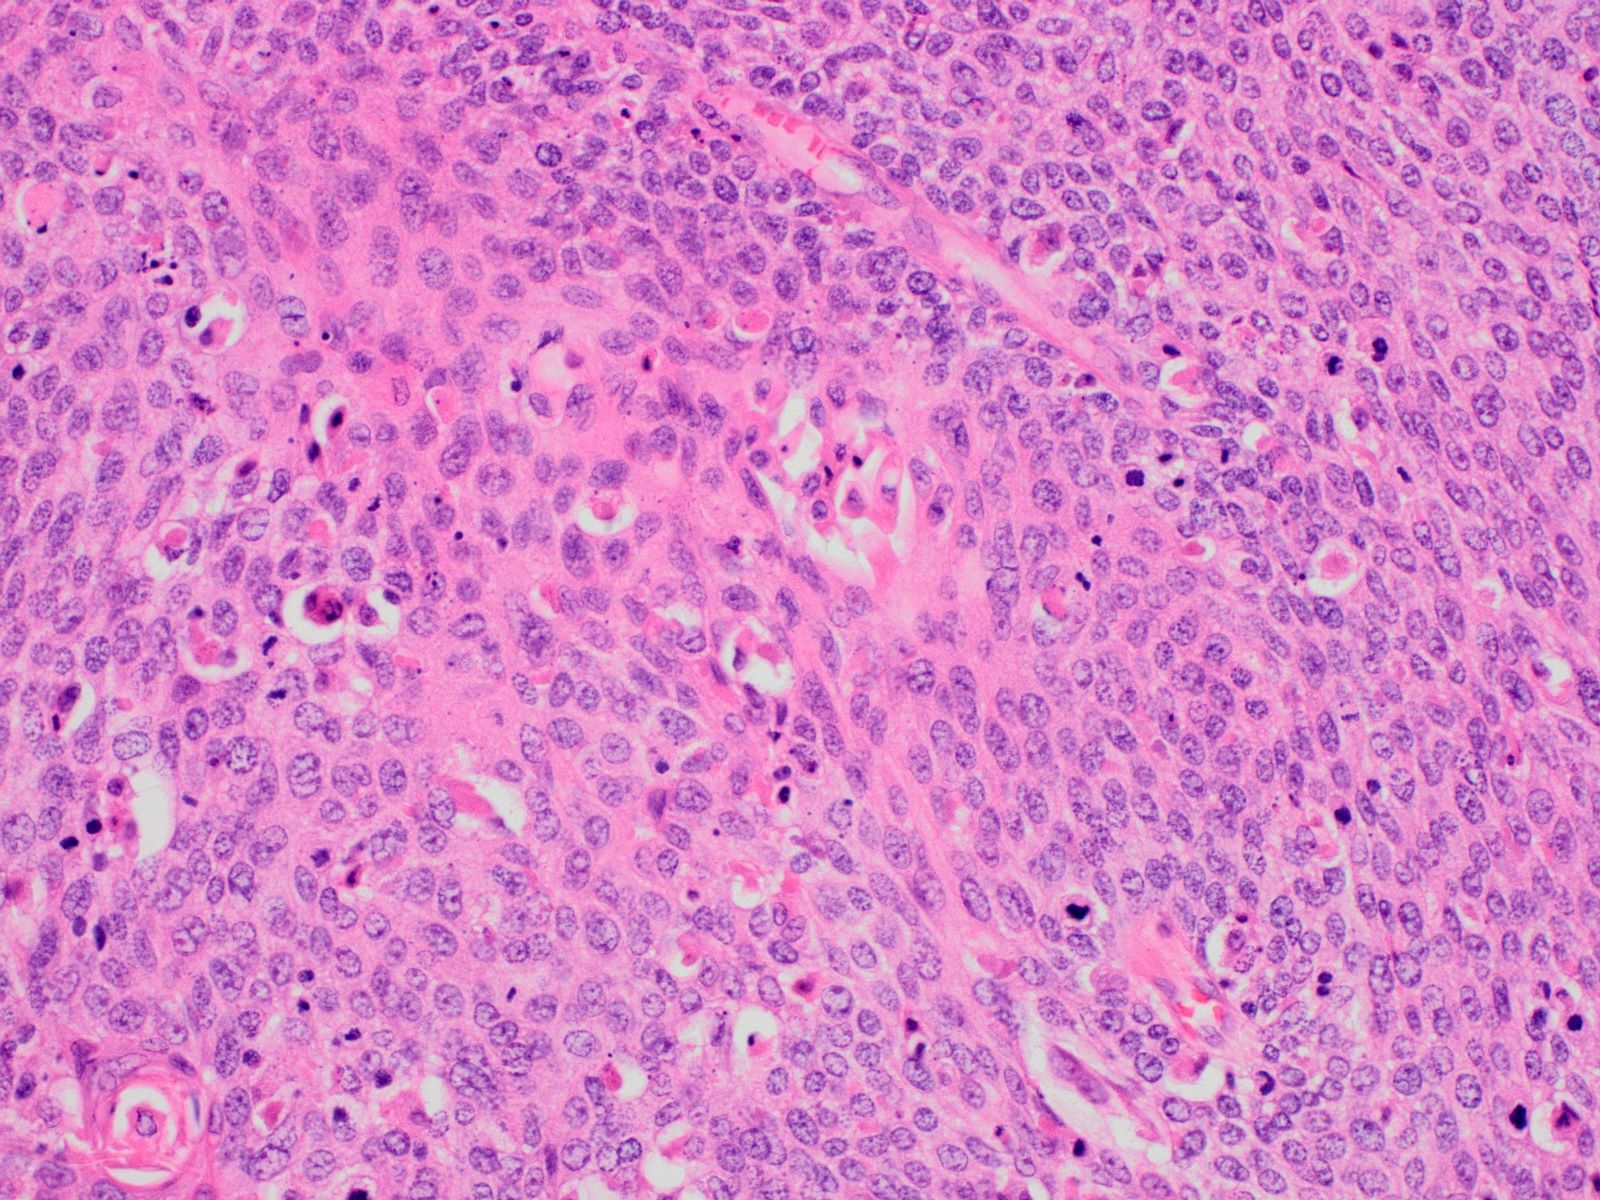 Poorly differentiated tumor